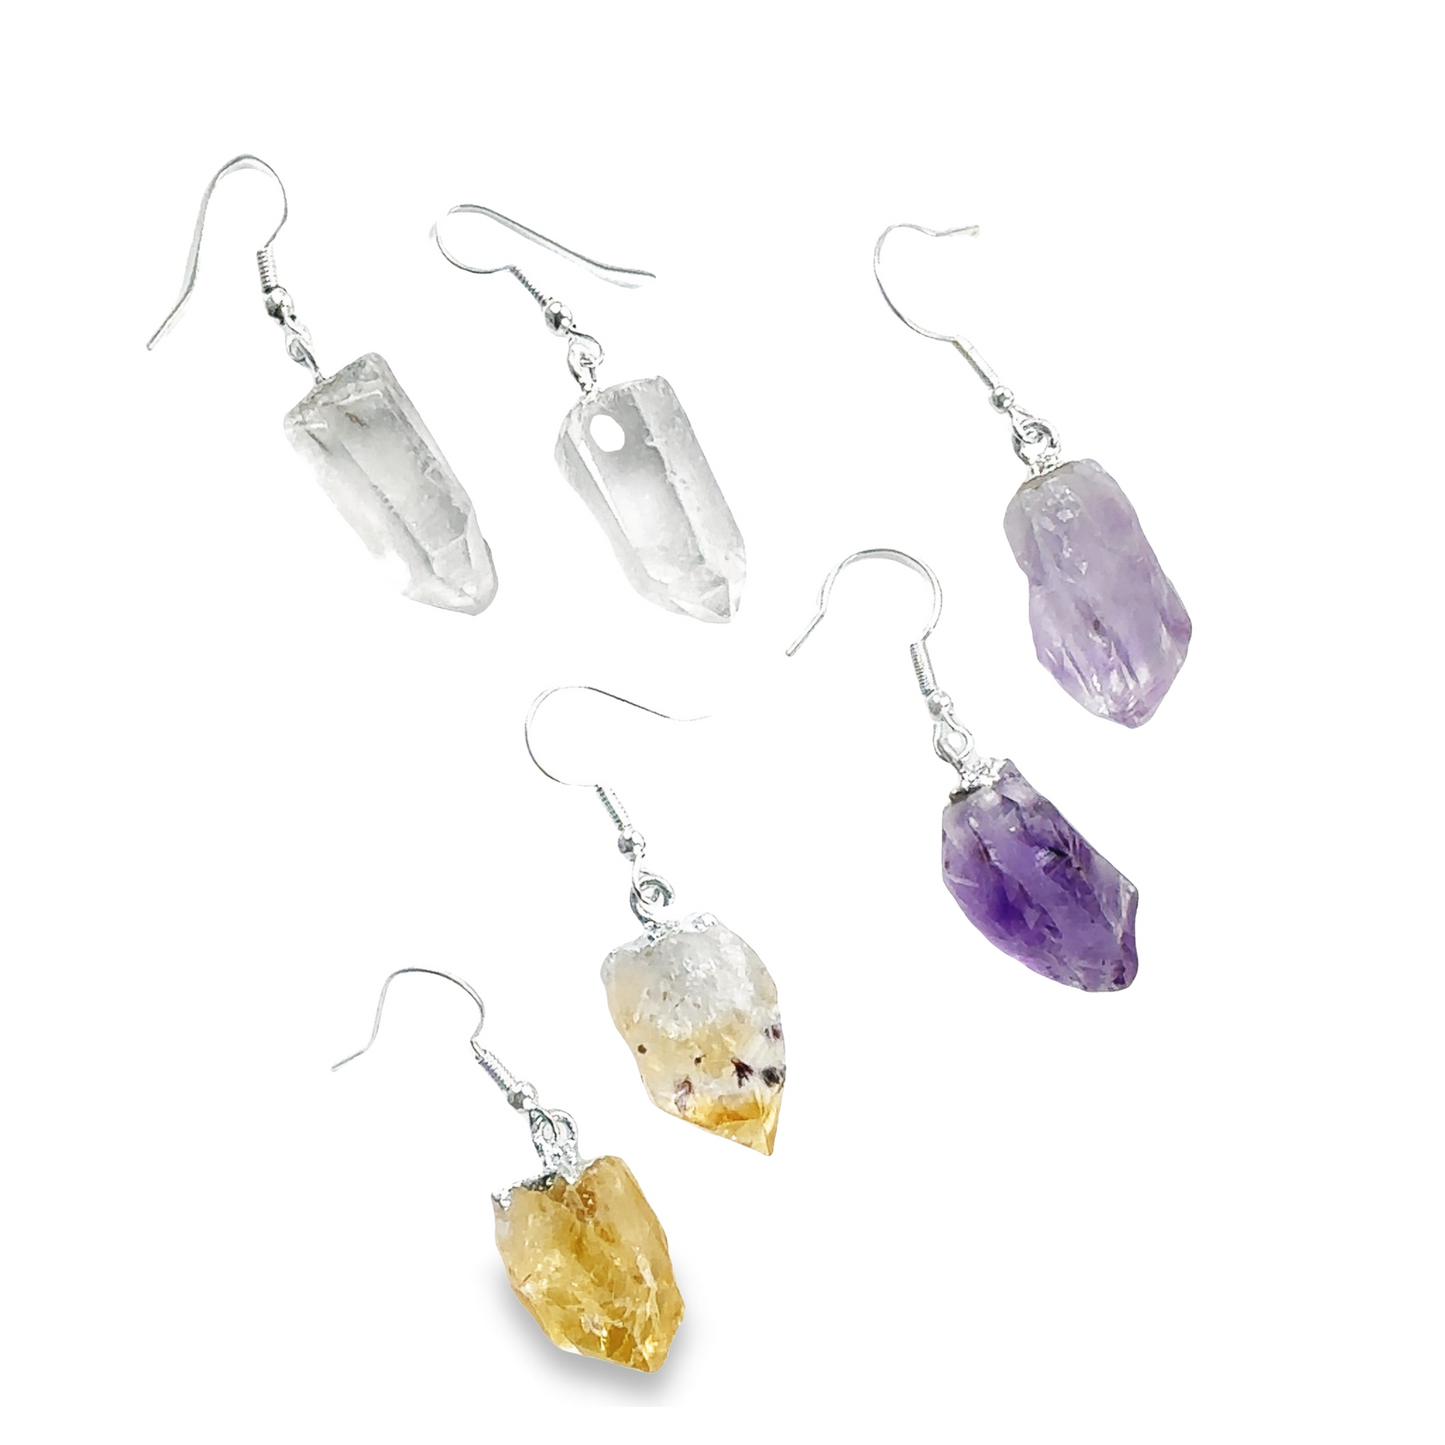 A set of Simple Raw Crystal Earrings with a boho vibe from Super Silver.